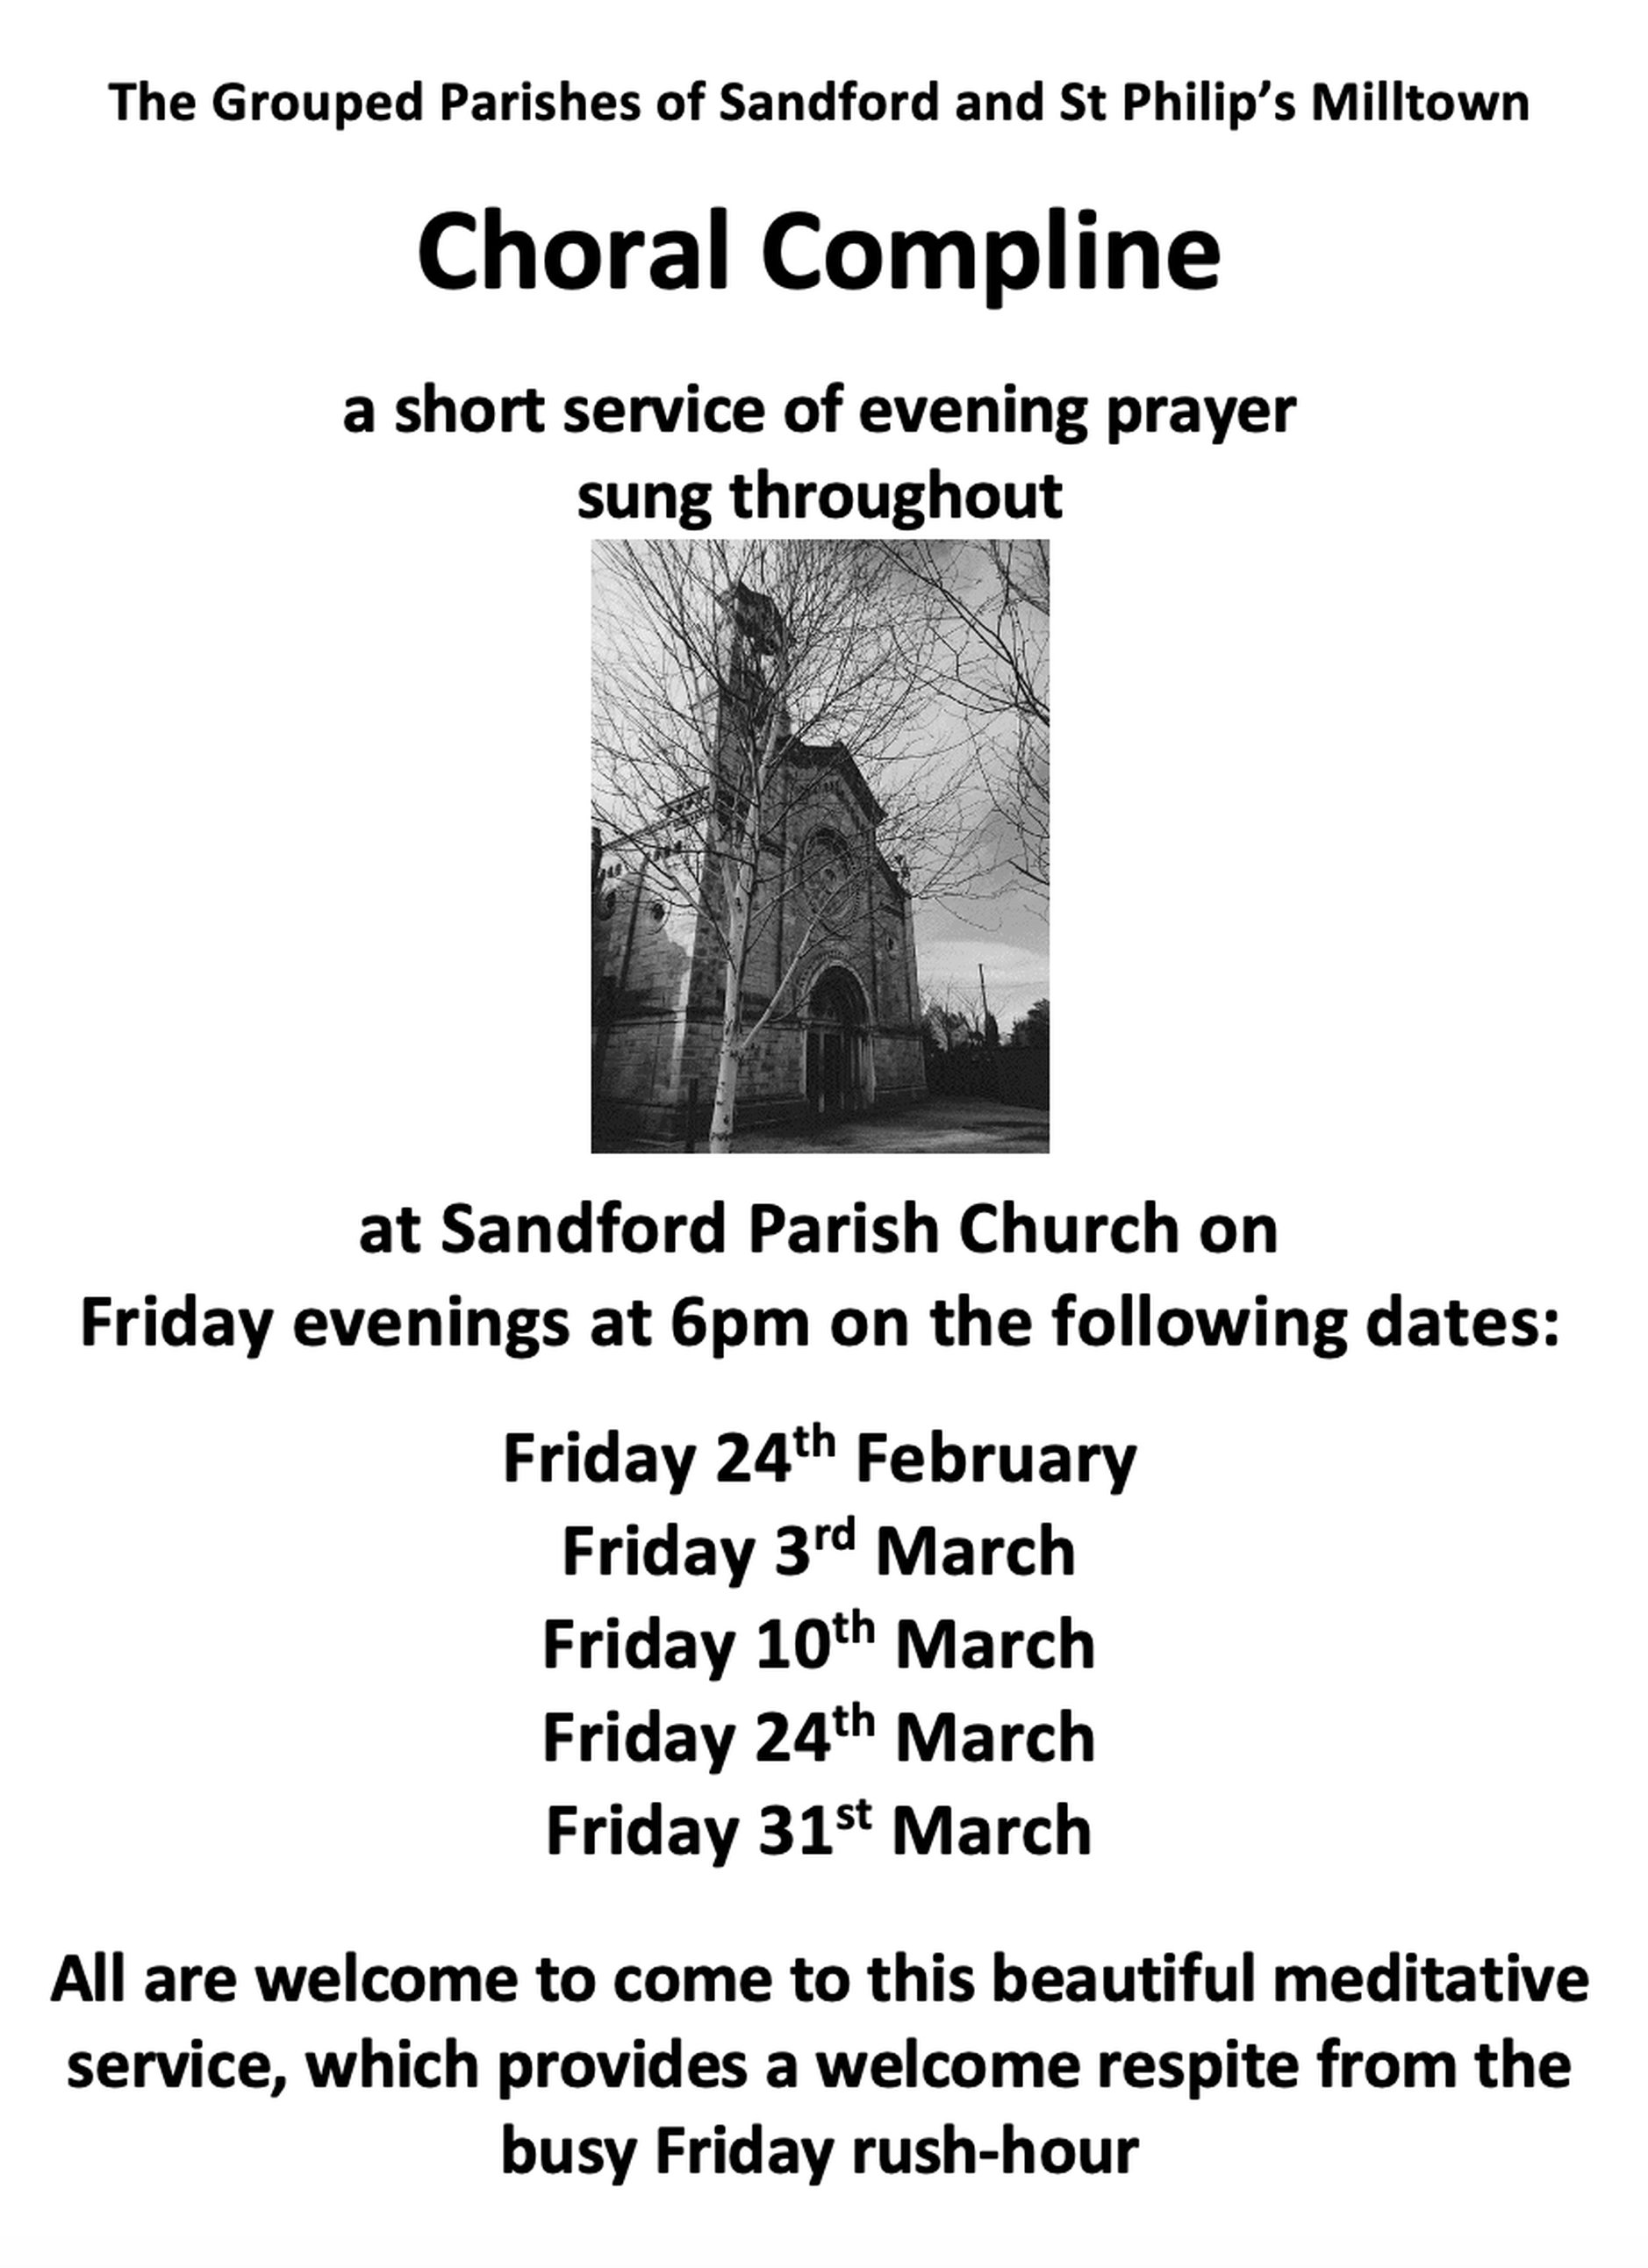 Choral Compline in Sandford – Fridays during Lent - Every Friday in Lent at 6pm.